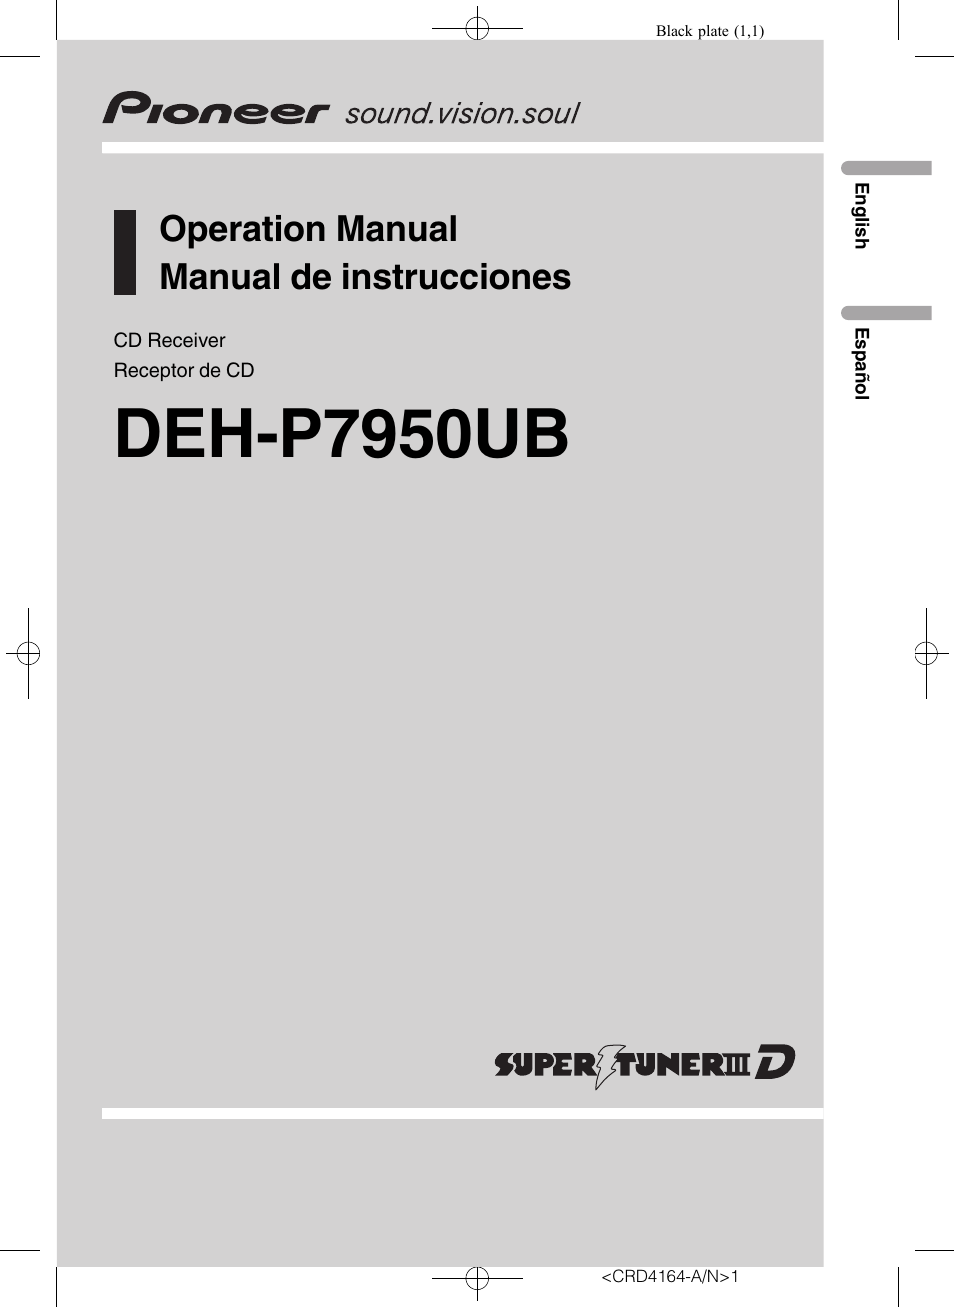 Pioneer SUPER TUNERIII D DEH-P7950UB User Manual | 132 pages